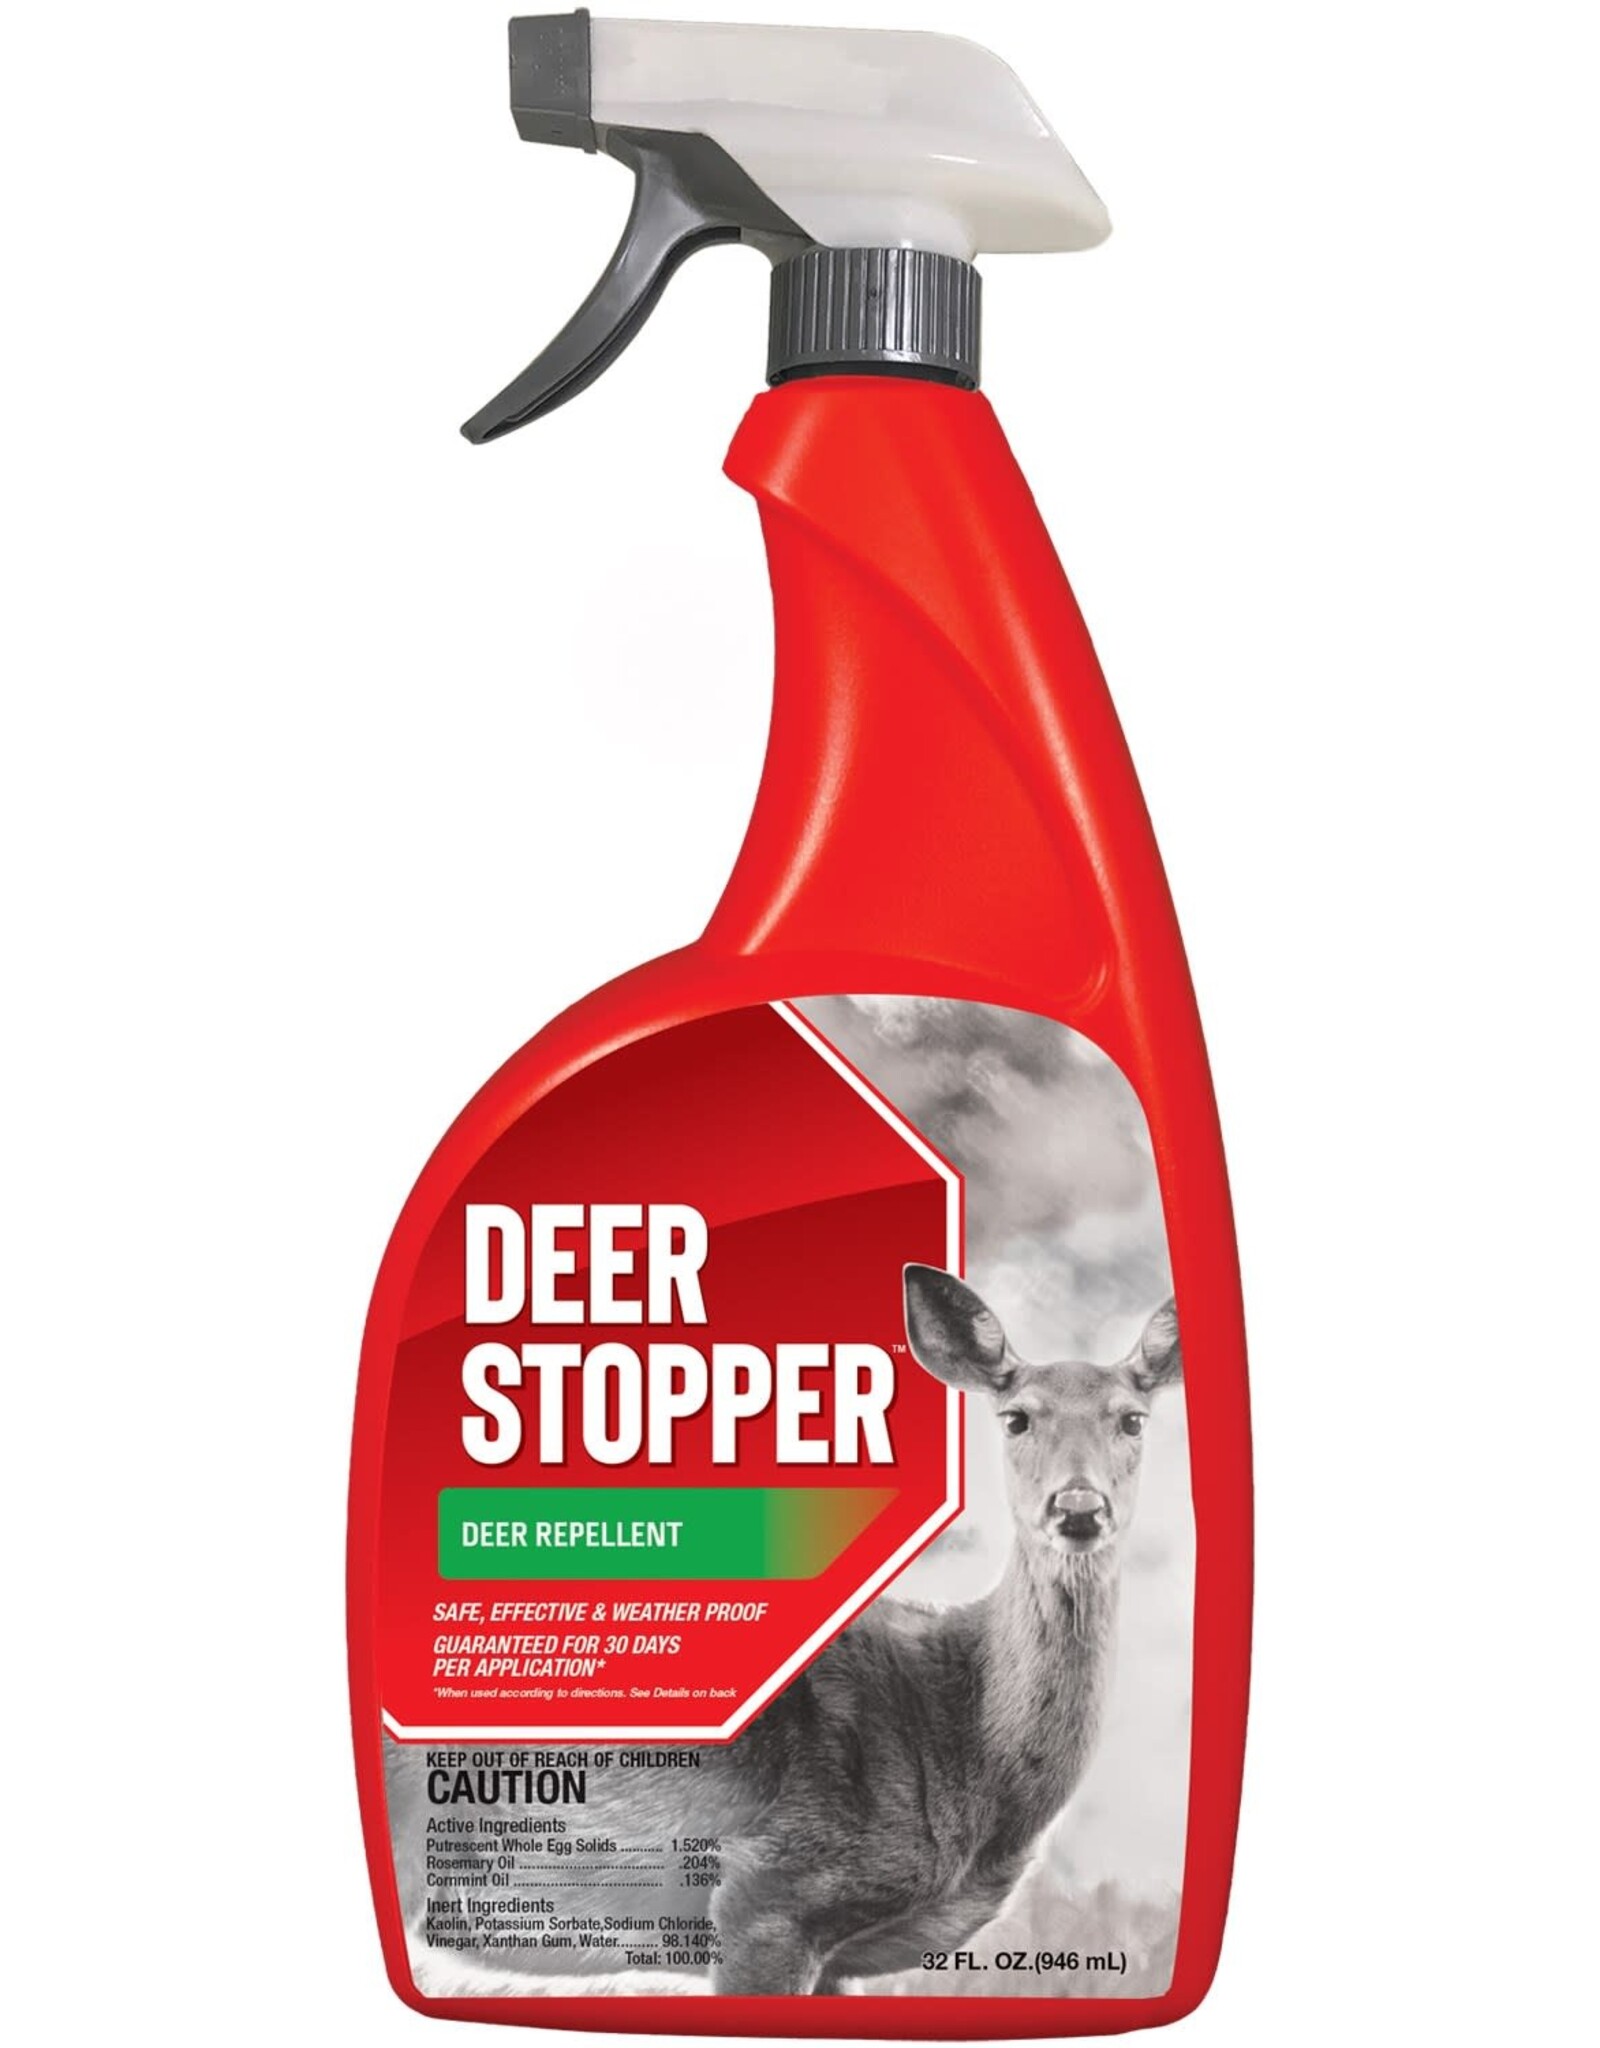 MESSINAS Messinas® Deer Stopper® Animal Repellent  - 32oz - Ready-to-Use - Trigger Spray